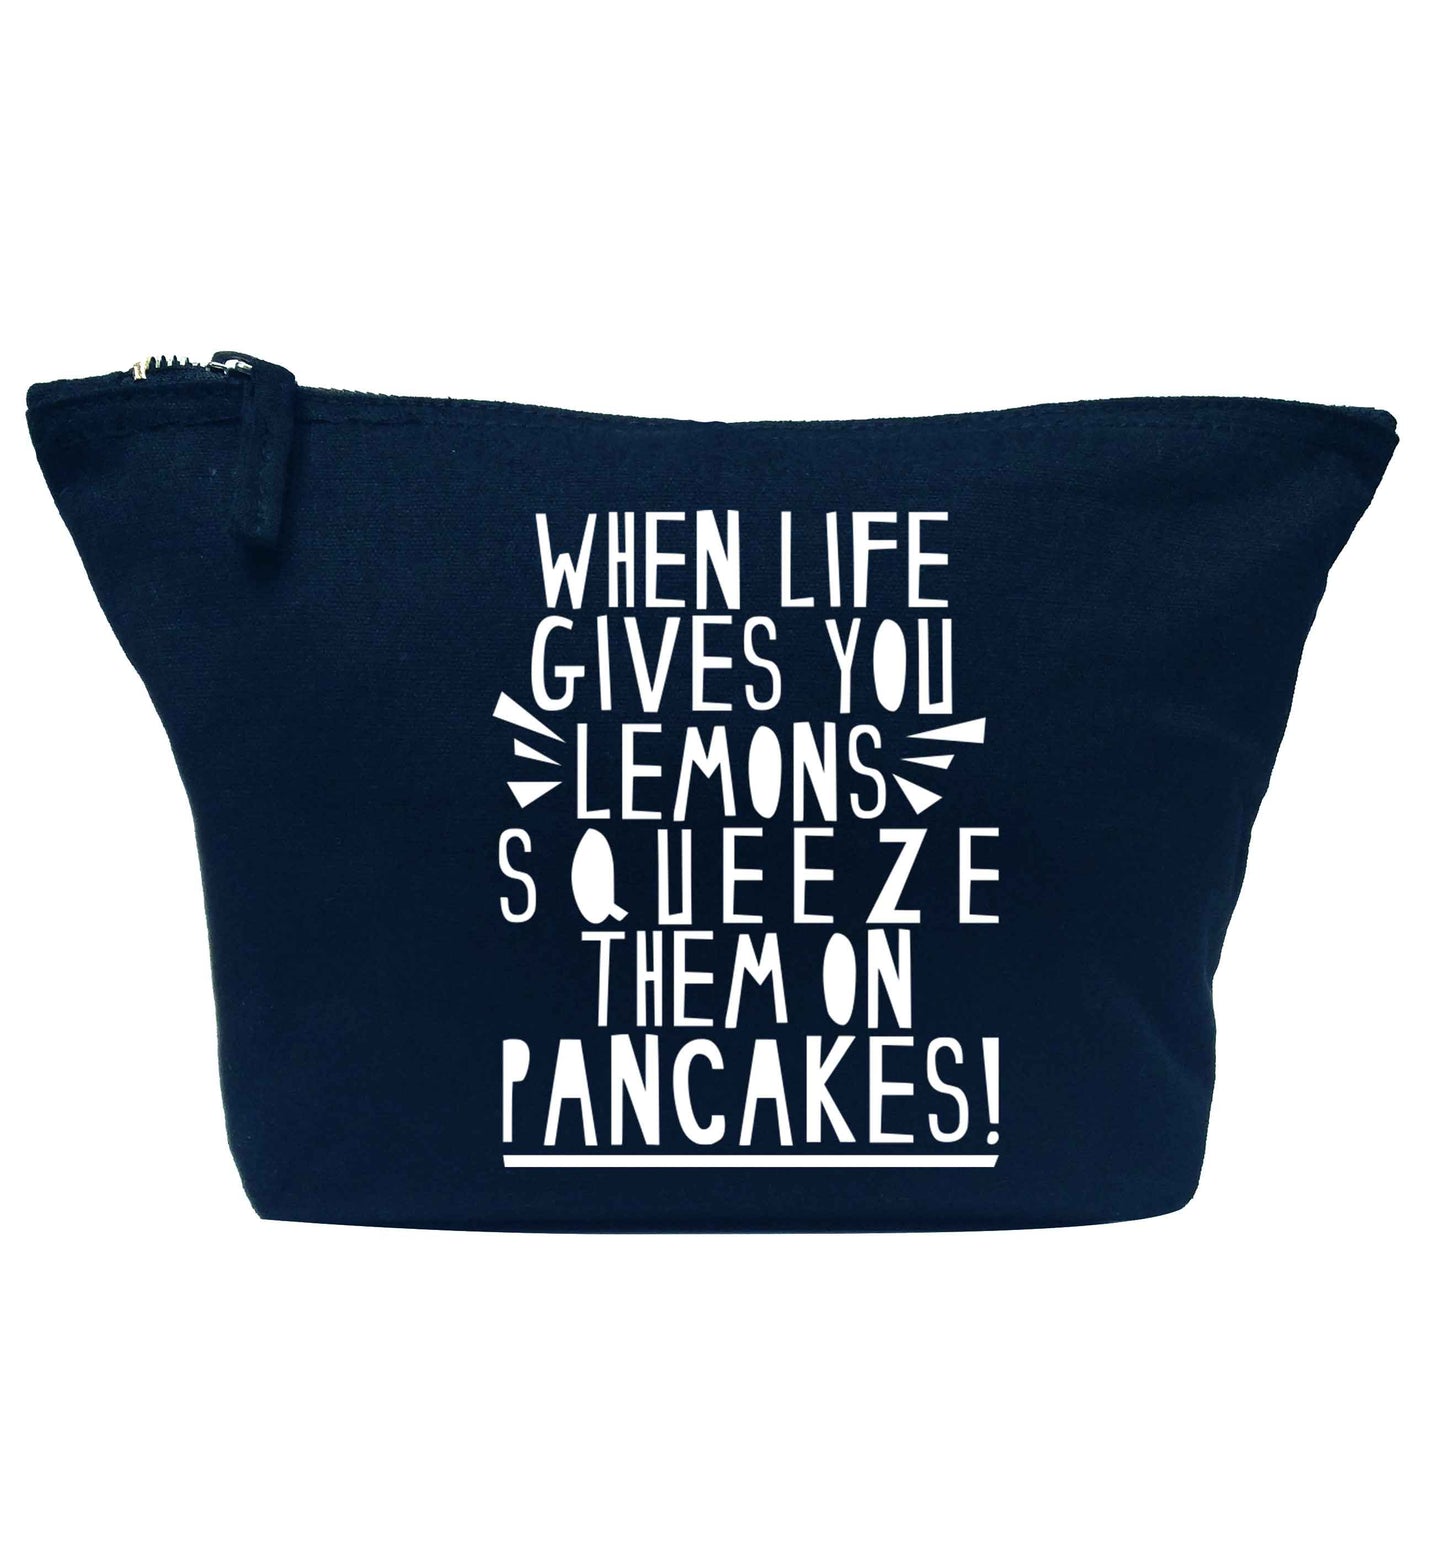 When life gives you lemons squeeze them on pancakes! navy makeup bag